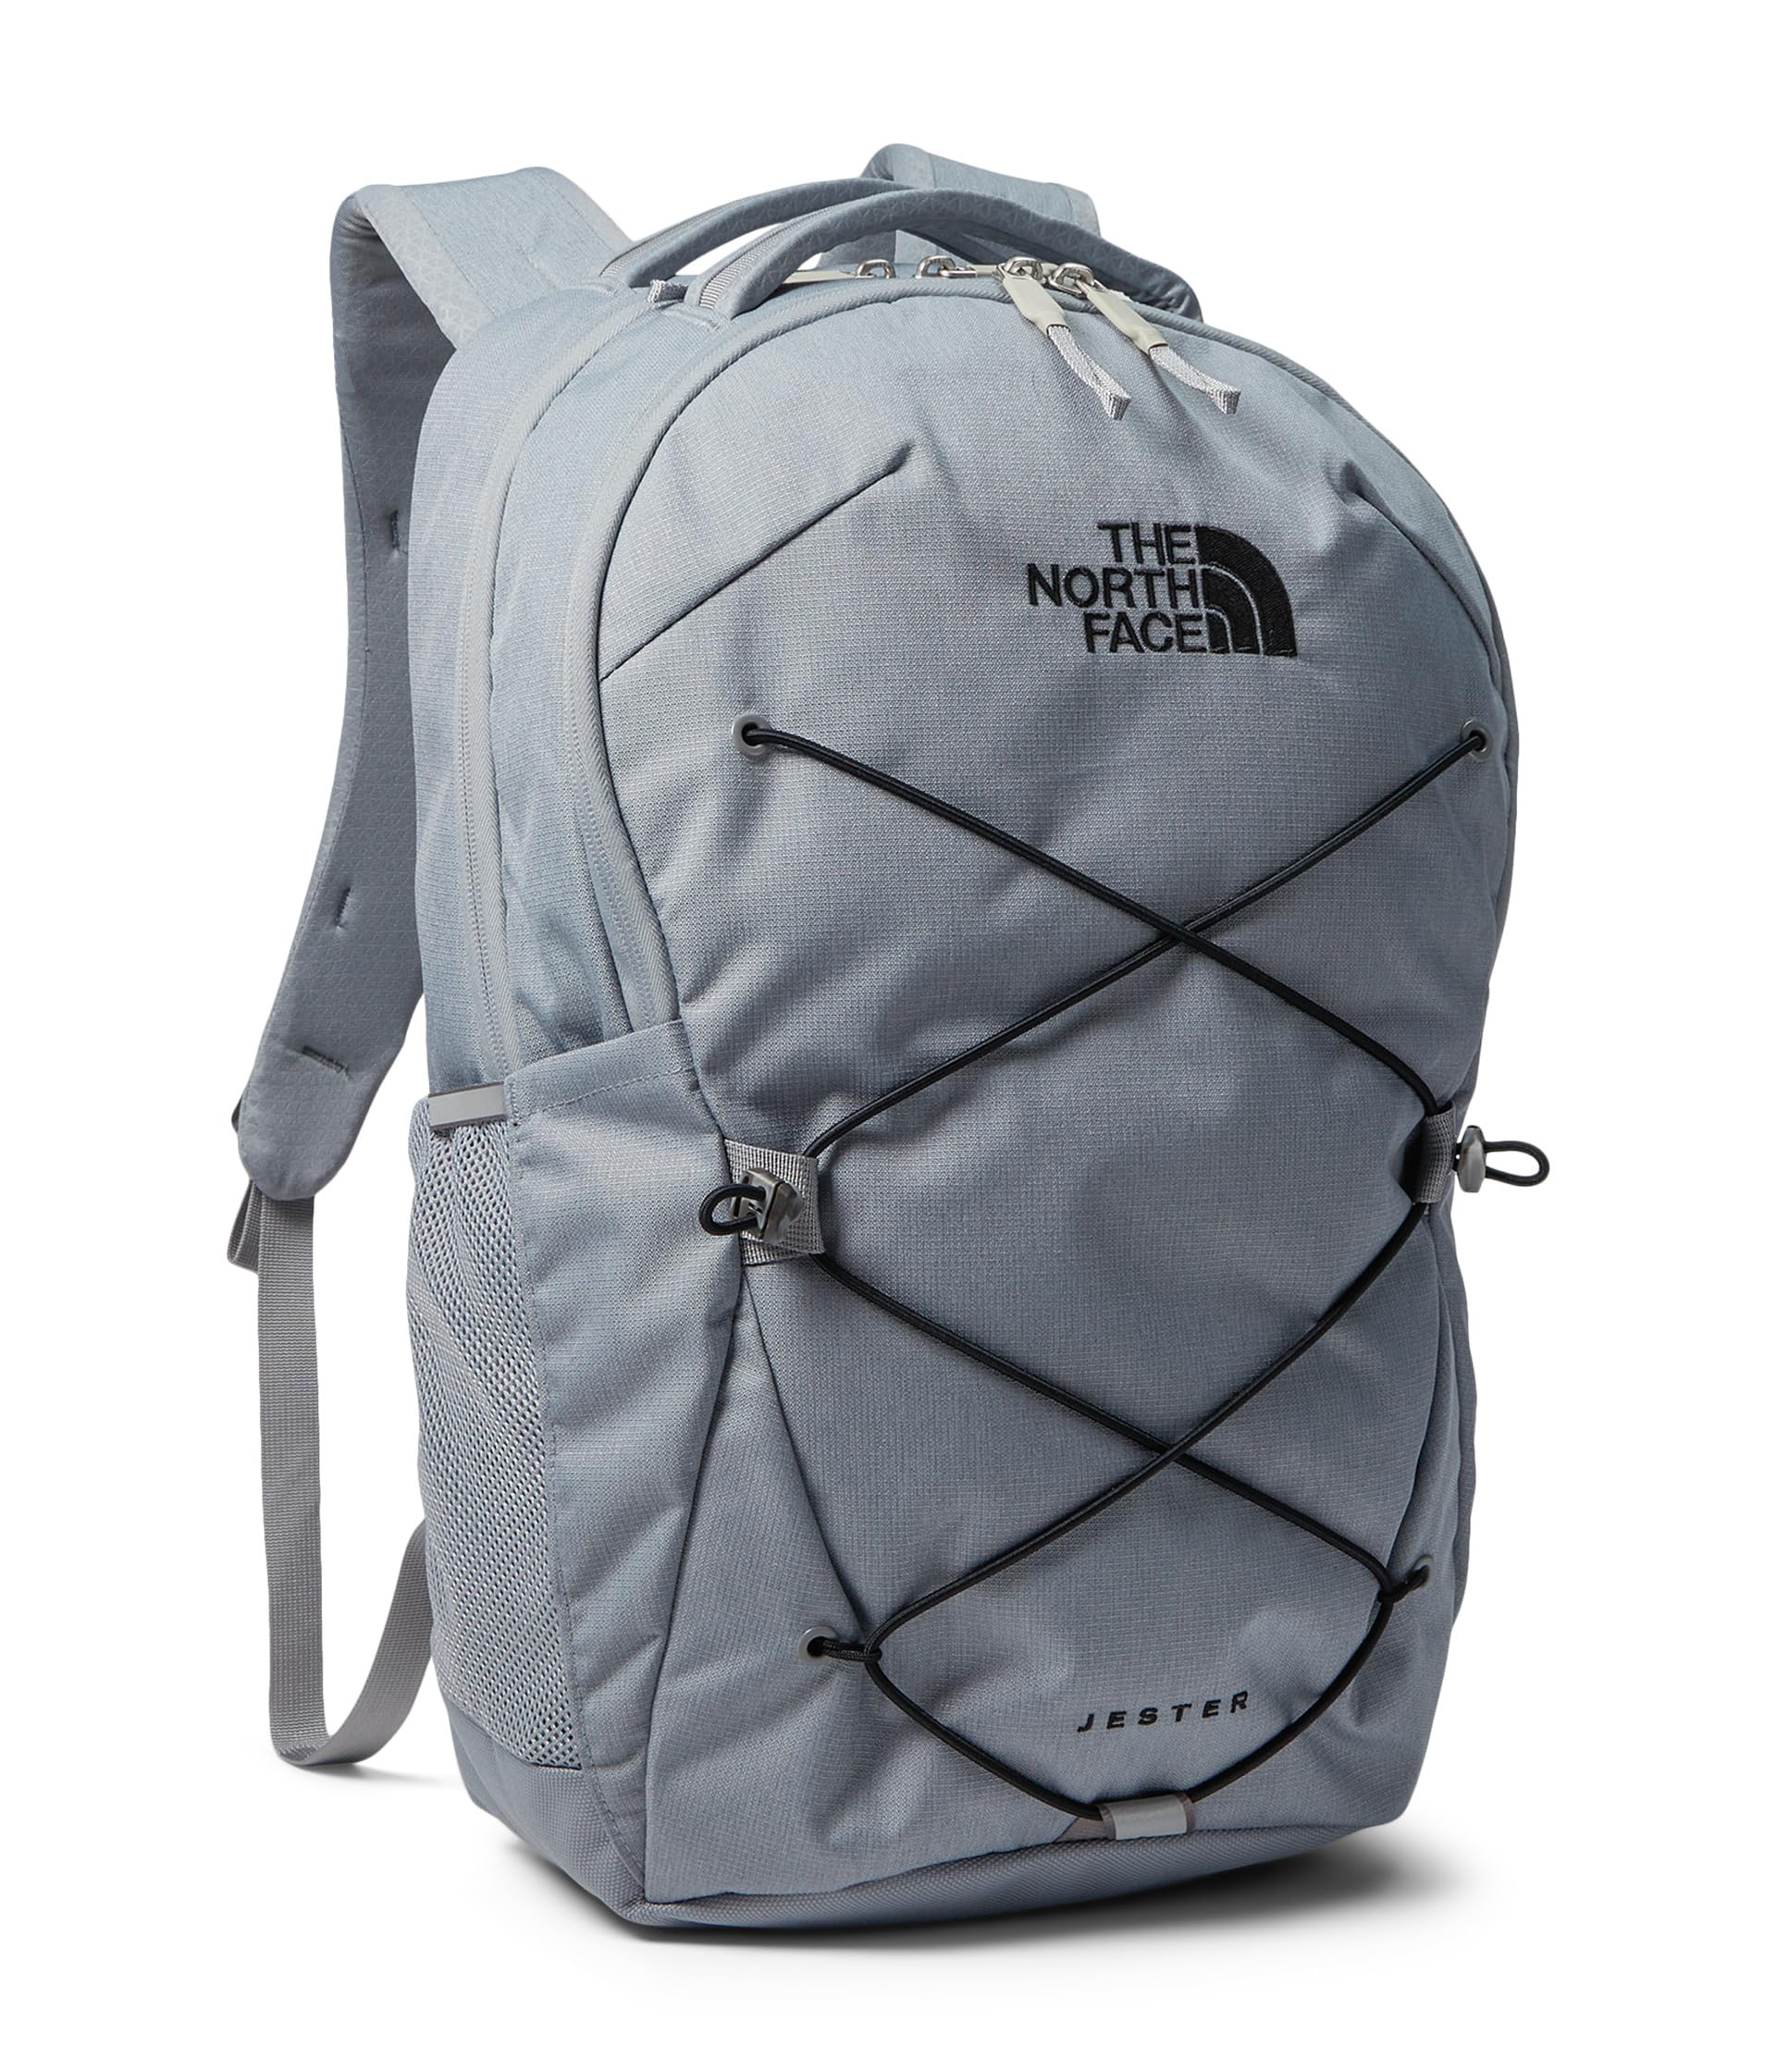 Jester Backpack The North Face